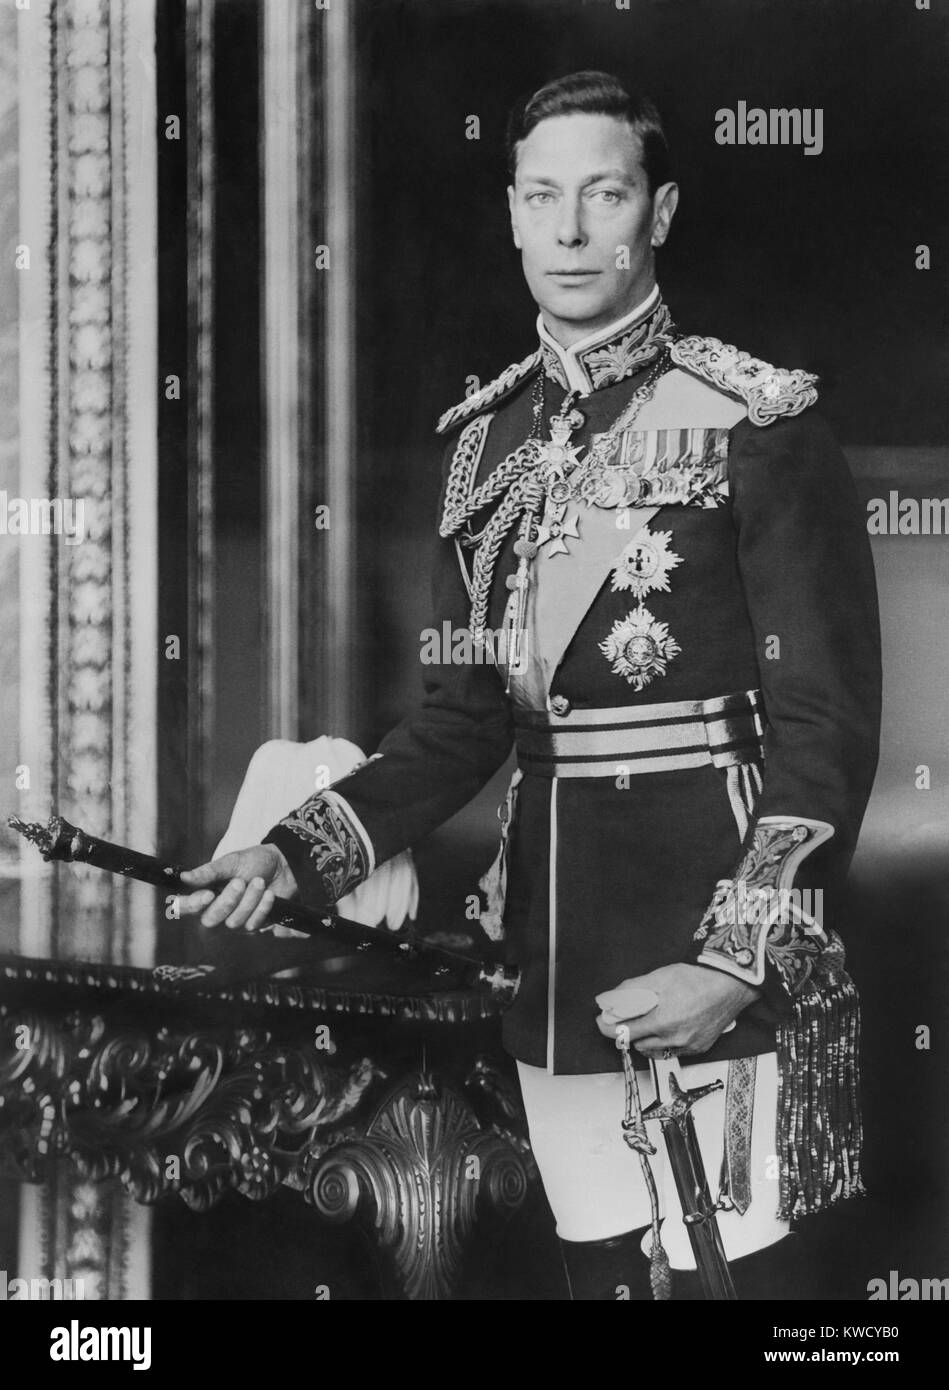 King George VI of Britain, shortly before his coronation in May 1937 (BSLOC 2017 1 89) Stock Photo